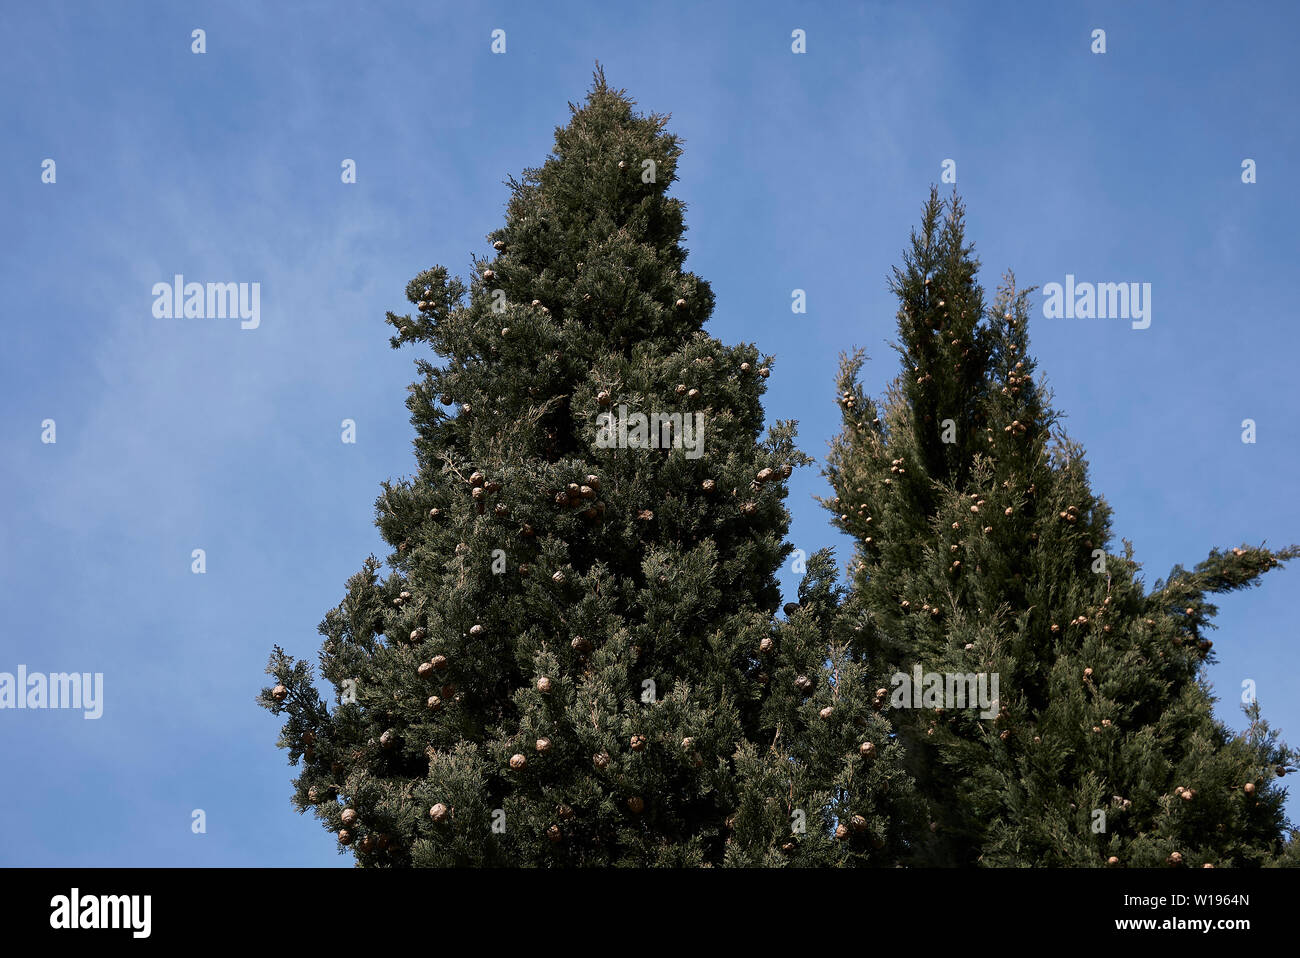 Cupressus sempervirens branch with cones Stock Photo